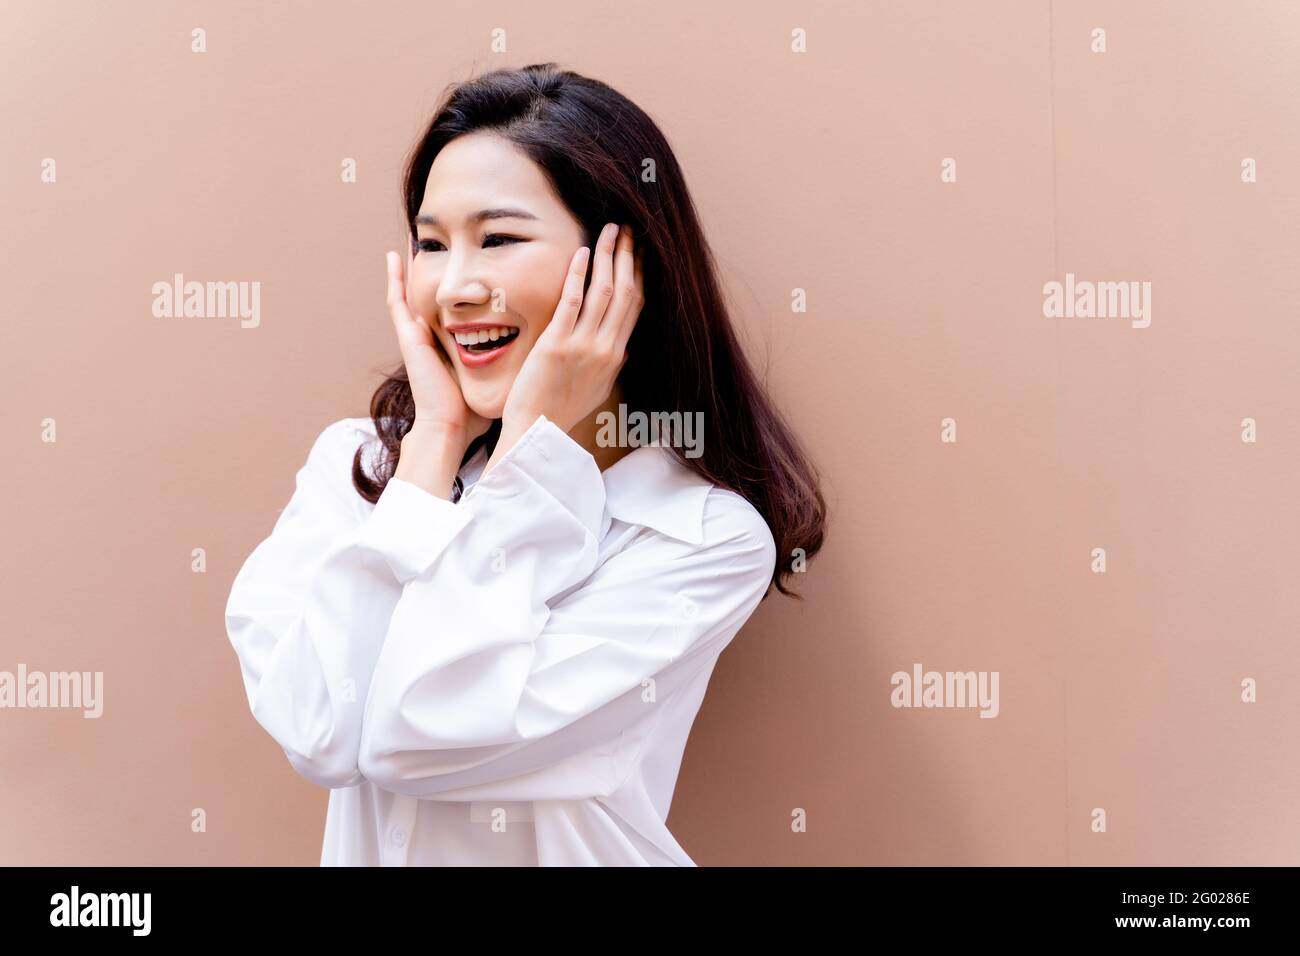 20s young Asian happy millenial woman in white shirt in clean background smiling and laughing confidently with beautiful teeth. Portrait of beauty skin care and oral care concept Stock Photo